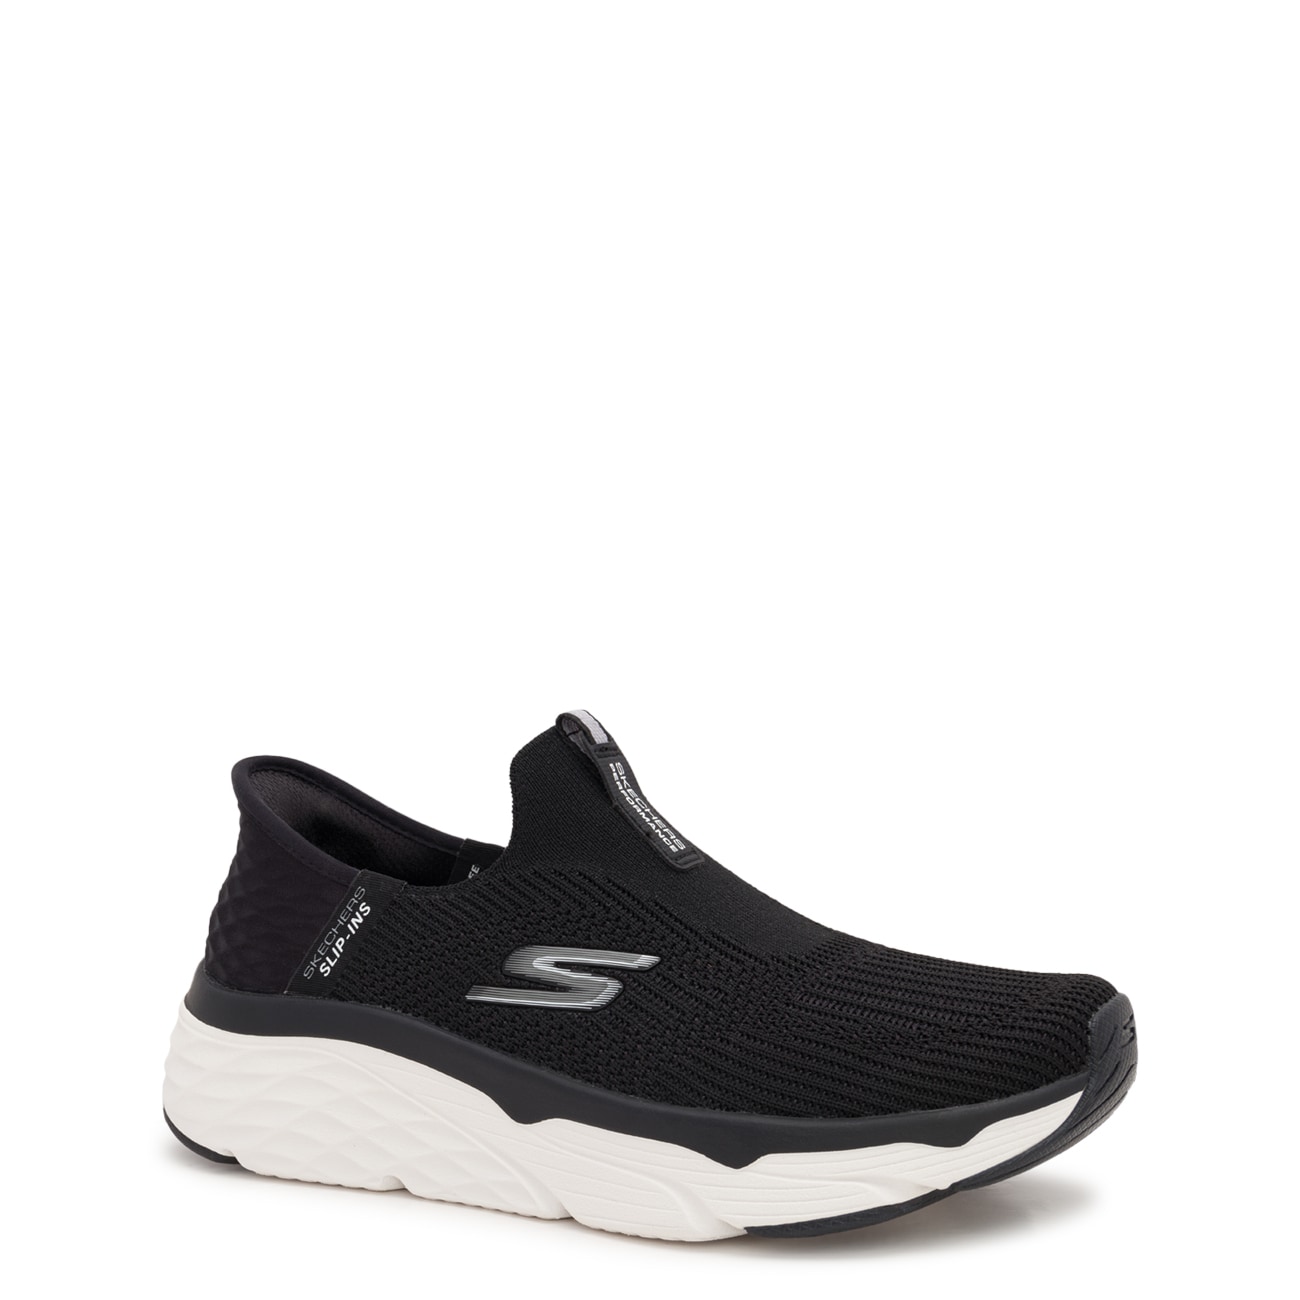 Women's Hands Free Slip-ins Max Cushioning - Smooth Sneaker